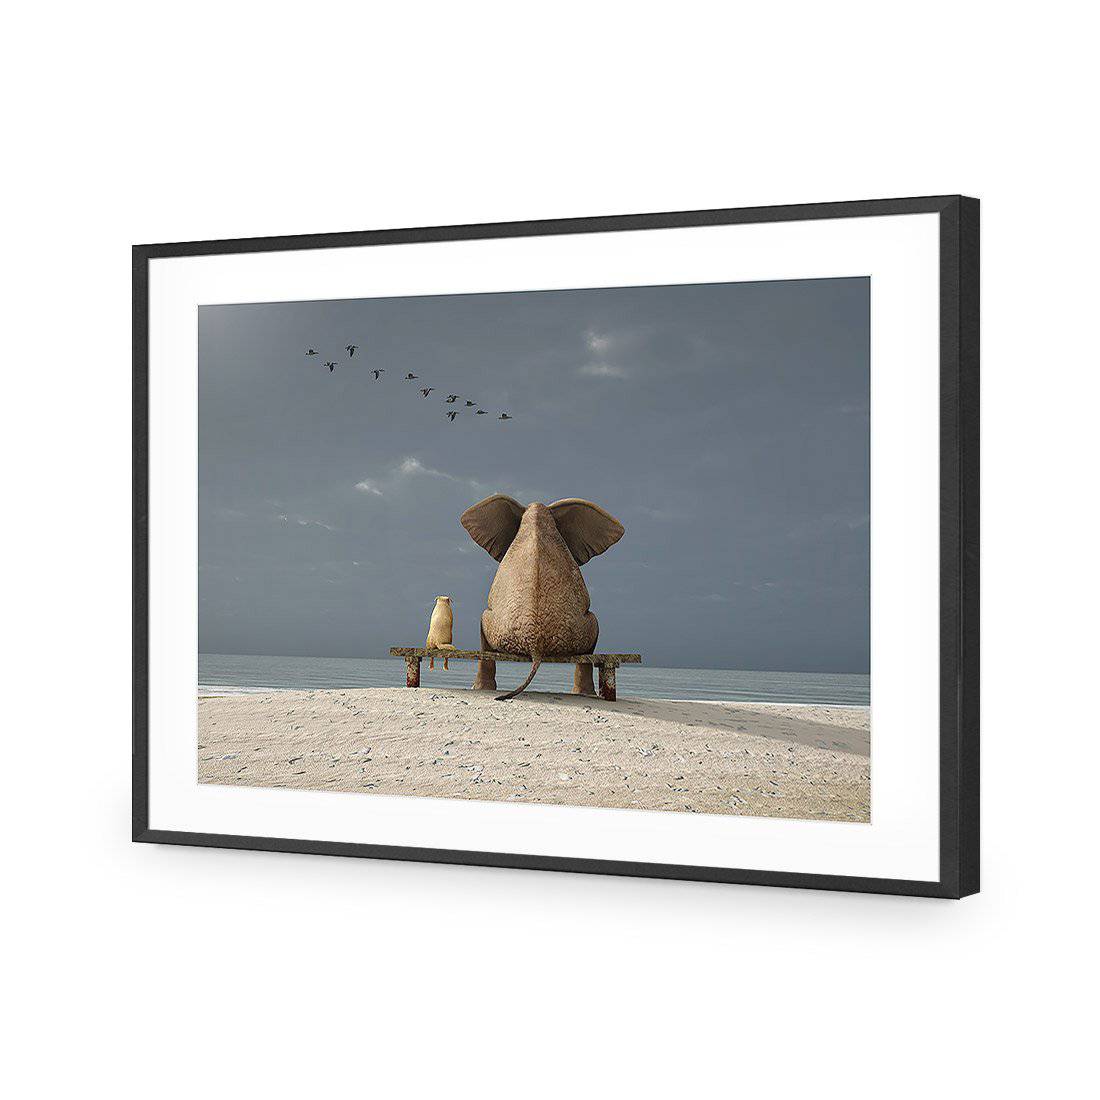 Little And Large-Acrylic-Wall Art Design-With Border-Acrylic - Black Frame-45x30cm-Wall Art Designs